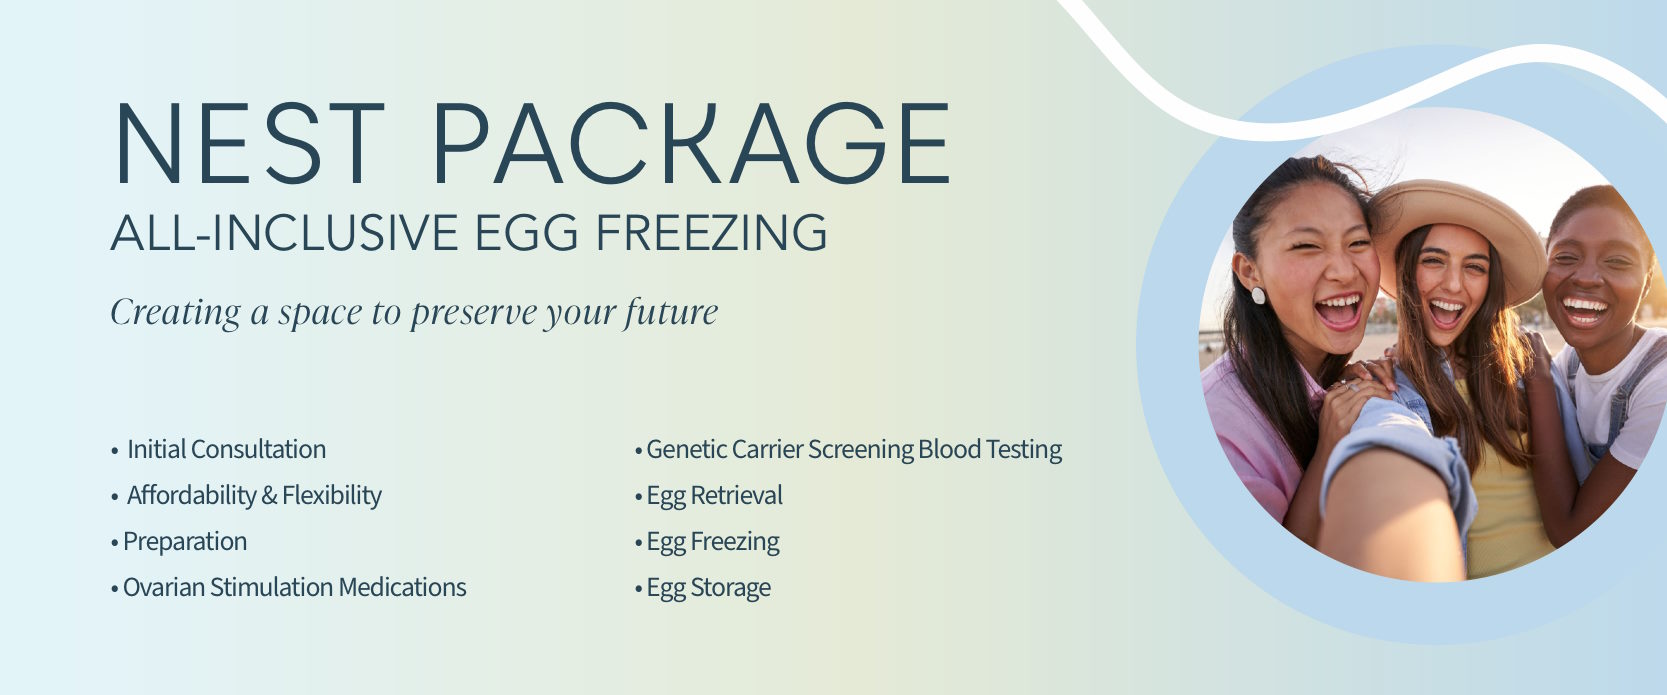 HRC Fertility's Nest Package with All-Inclusive Egg Freezing